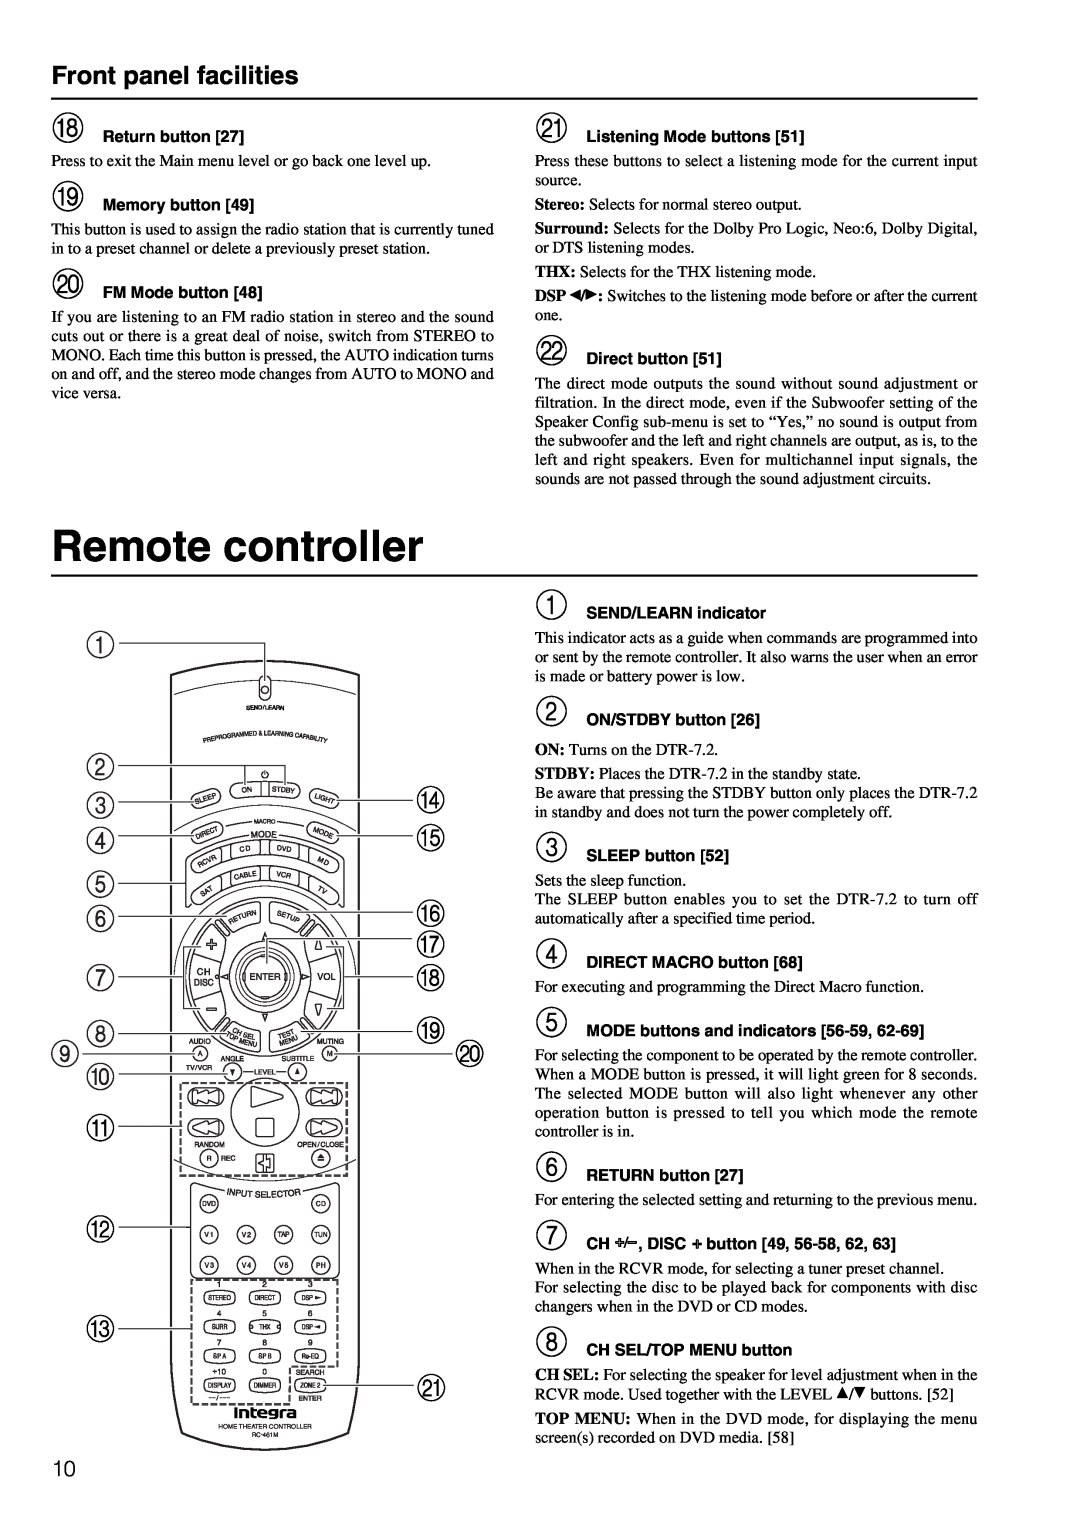 Integra DTR-7.2 instruction manual Remote controller, Front panel facilities 